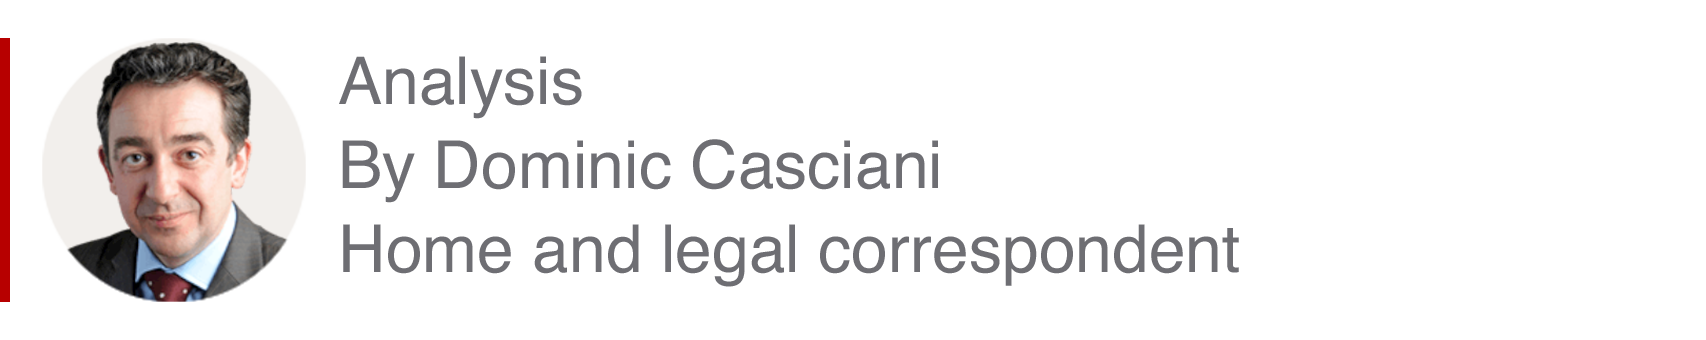 Analysis box by Dominic Casciani, home and legal correspondent